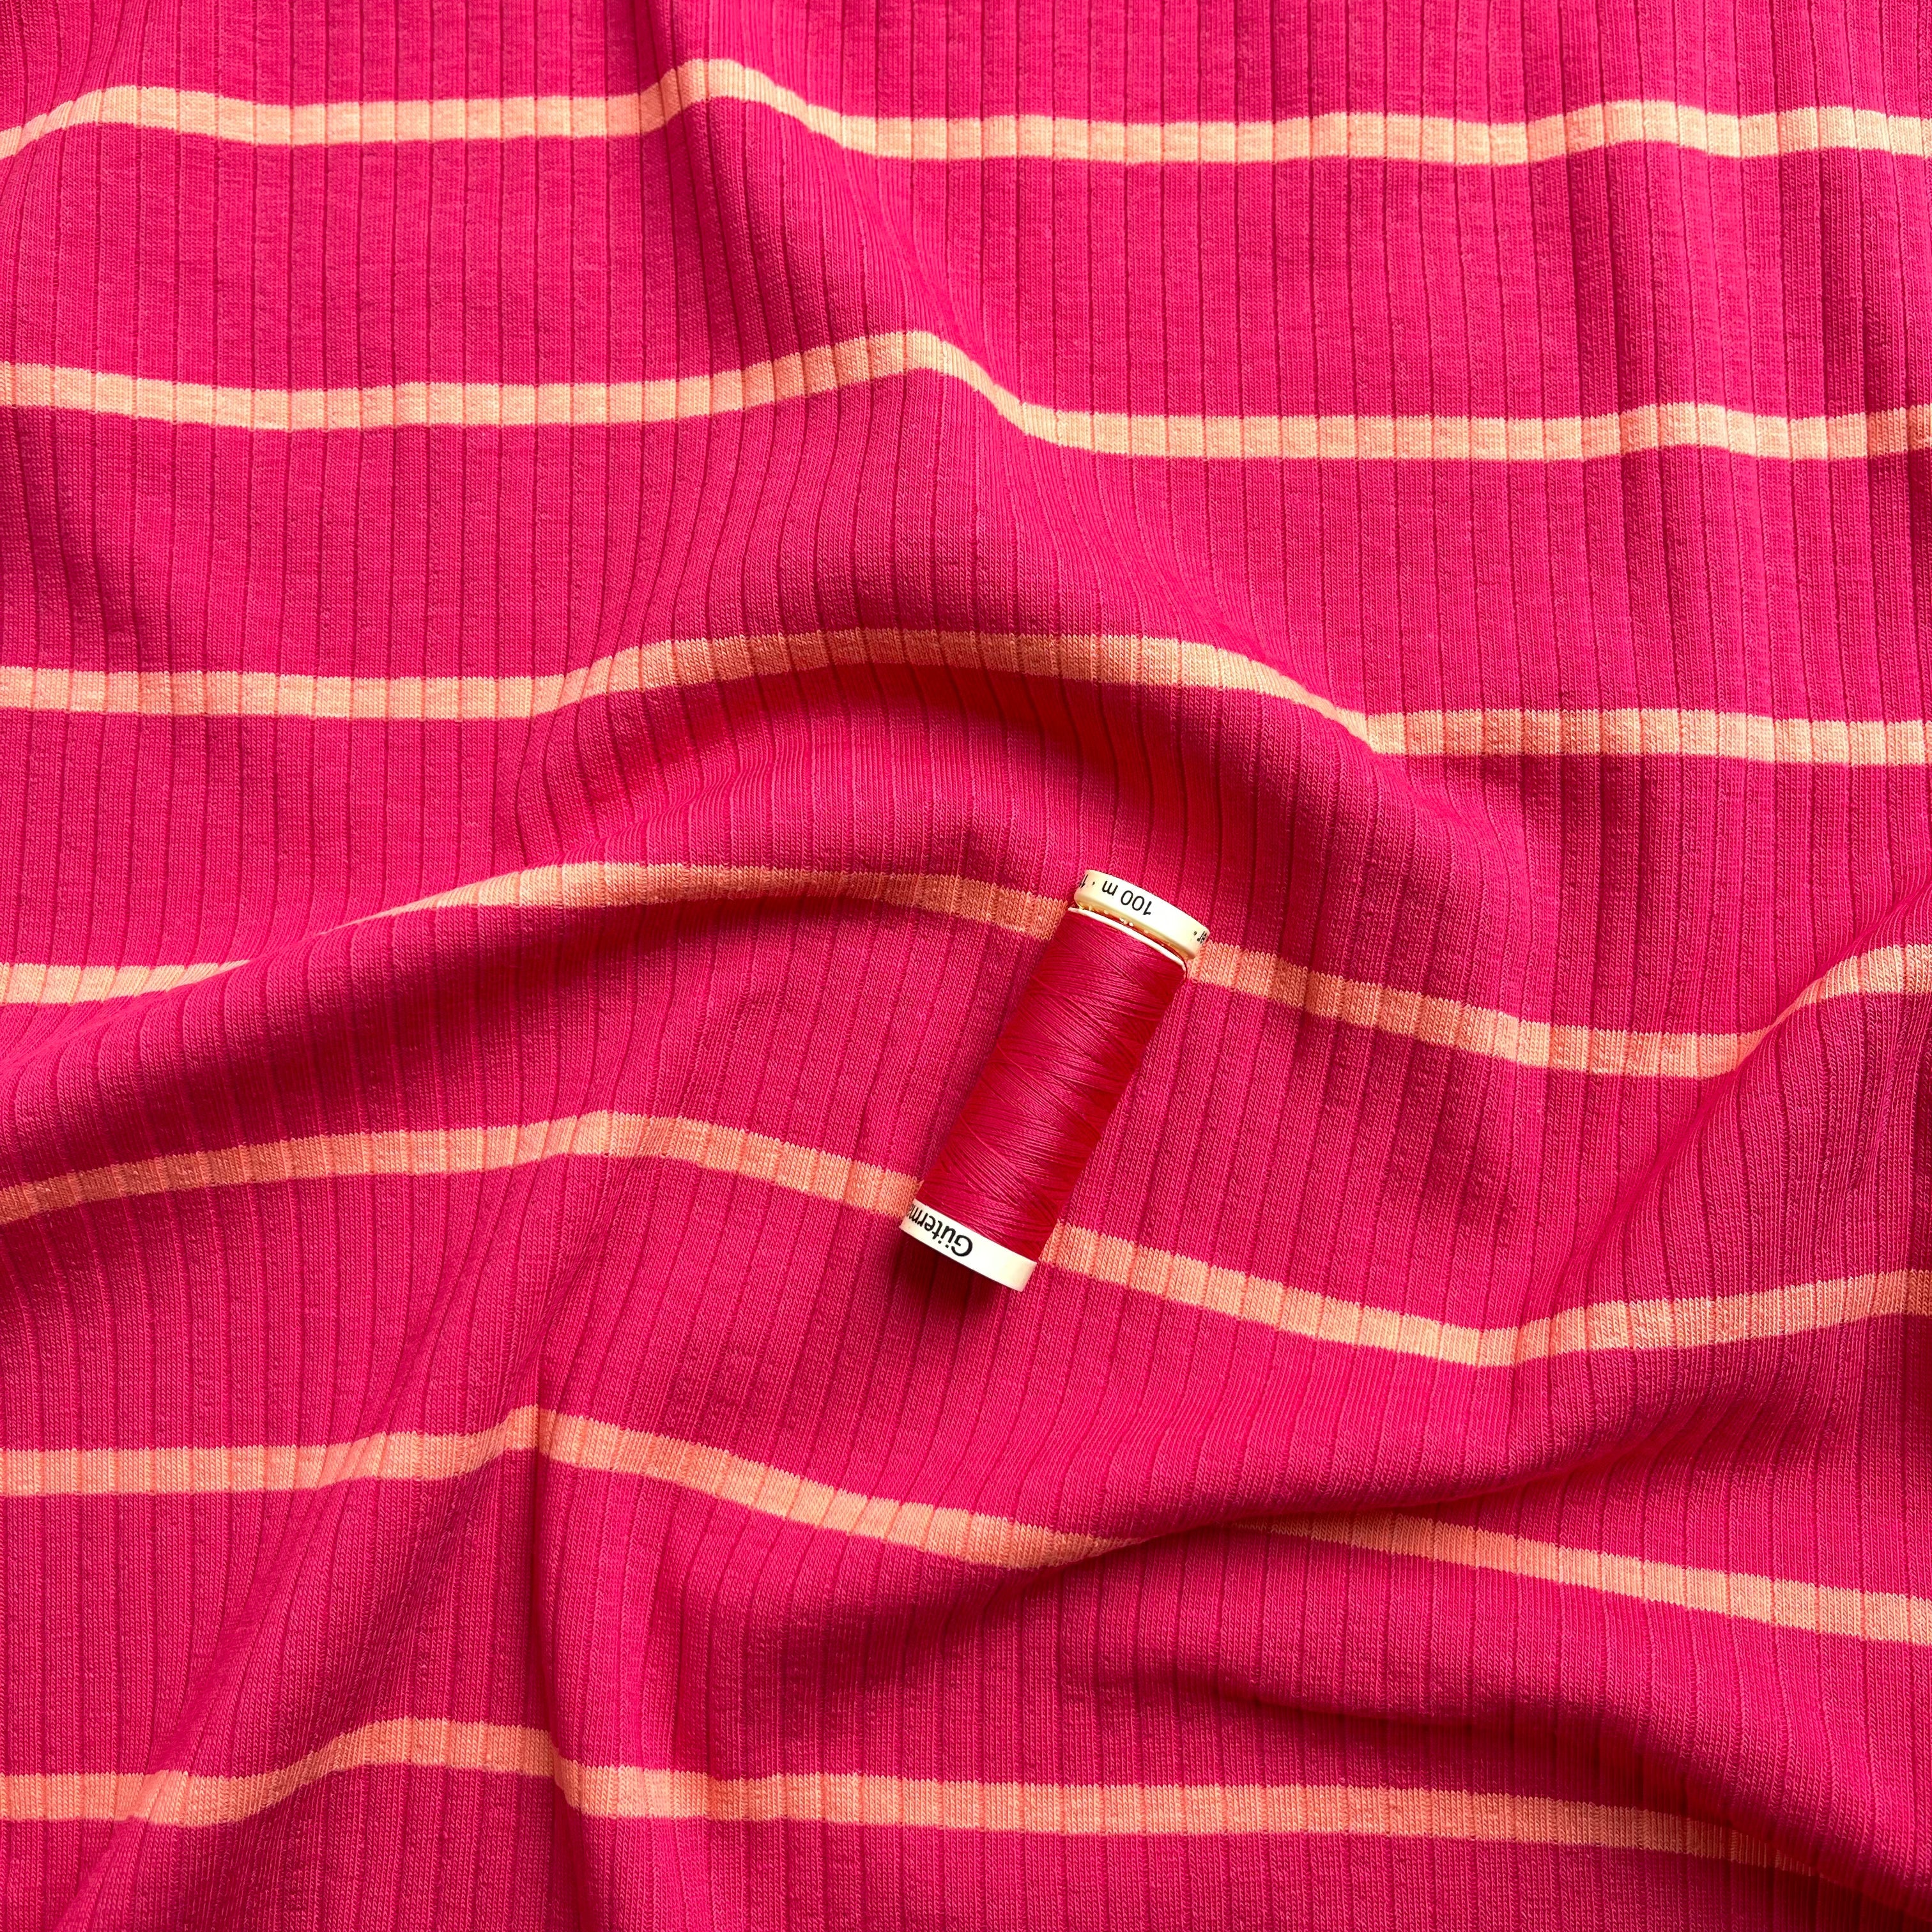 REMNANT 0.4 Metre - Yarn Dyed Striped Cotton Ribbed Jersey in Red & Coral.